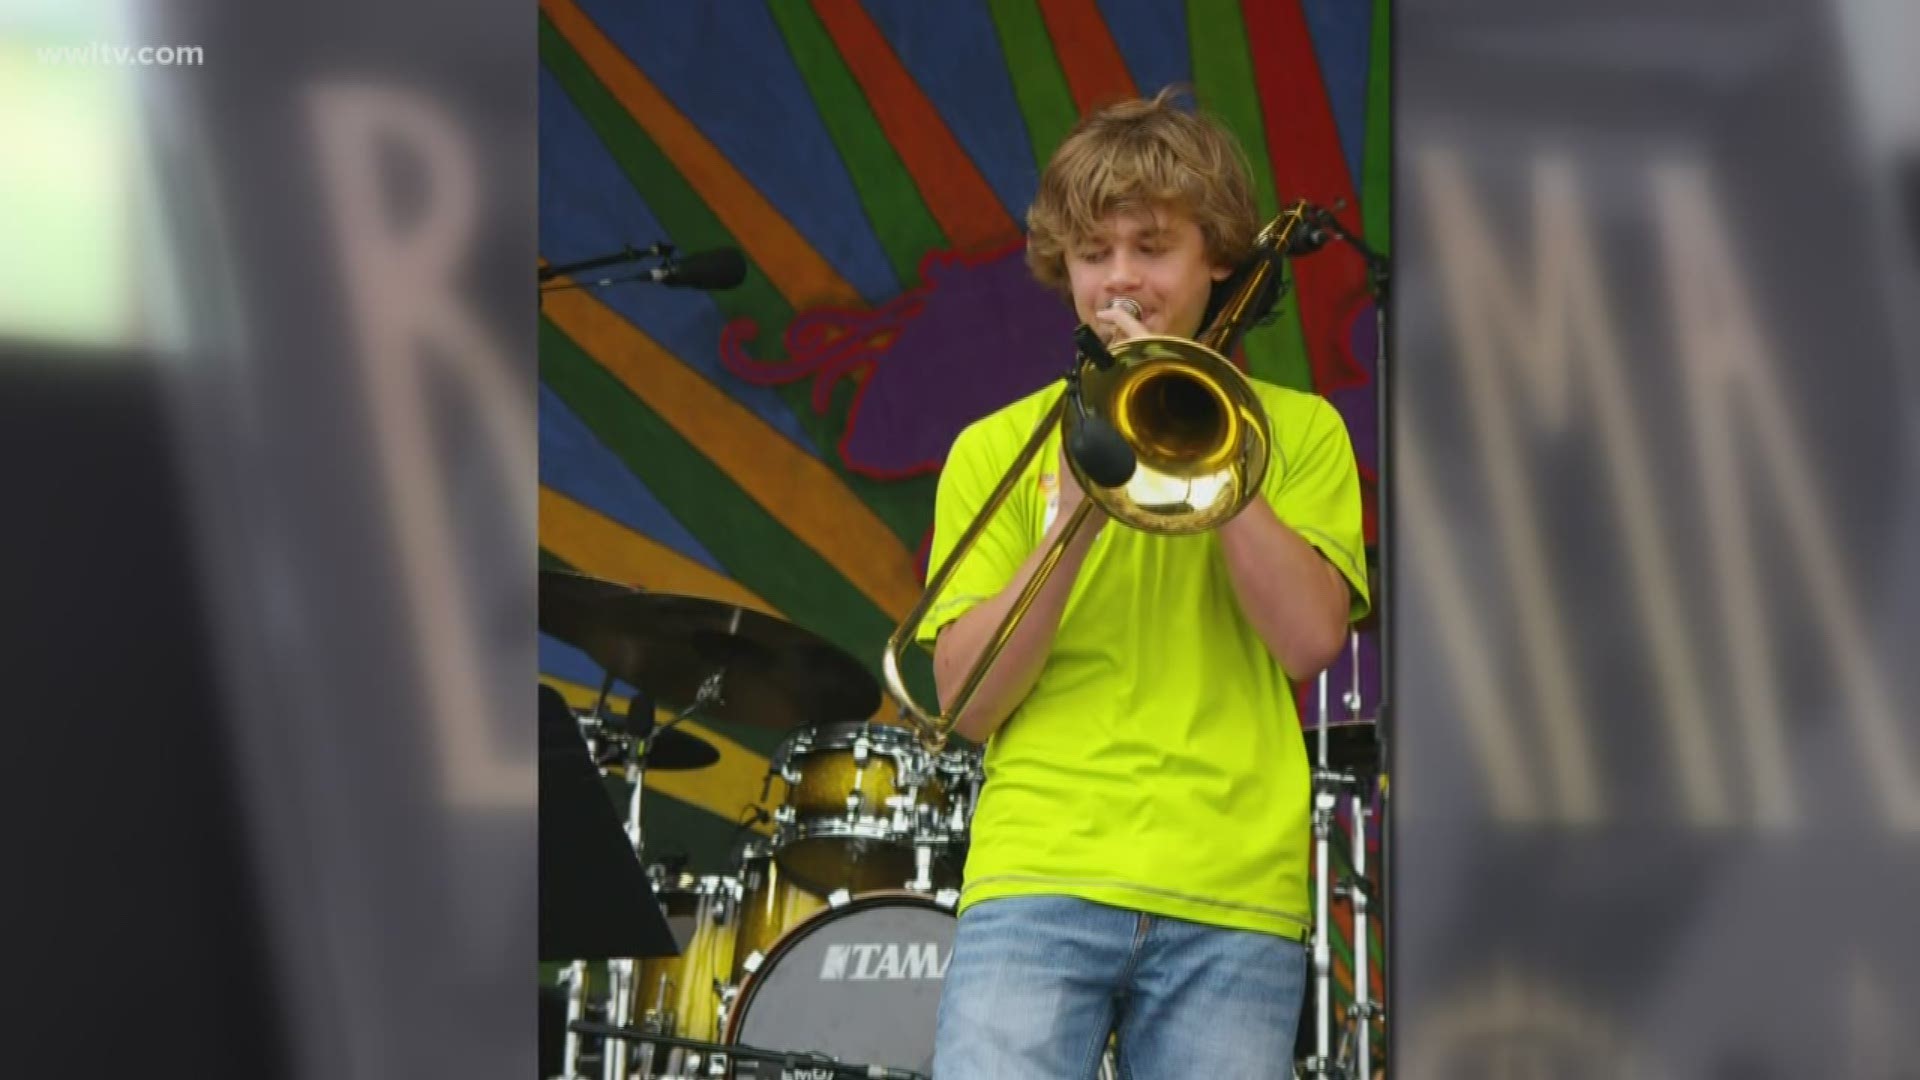 Erika Ferrando shines a light on Mark Mullens' 18 year old son Michael as he follows in his fathers musical foot steps and shows off his great talent with his fathers band on major stages.